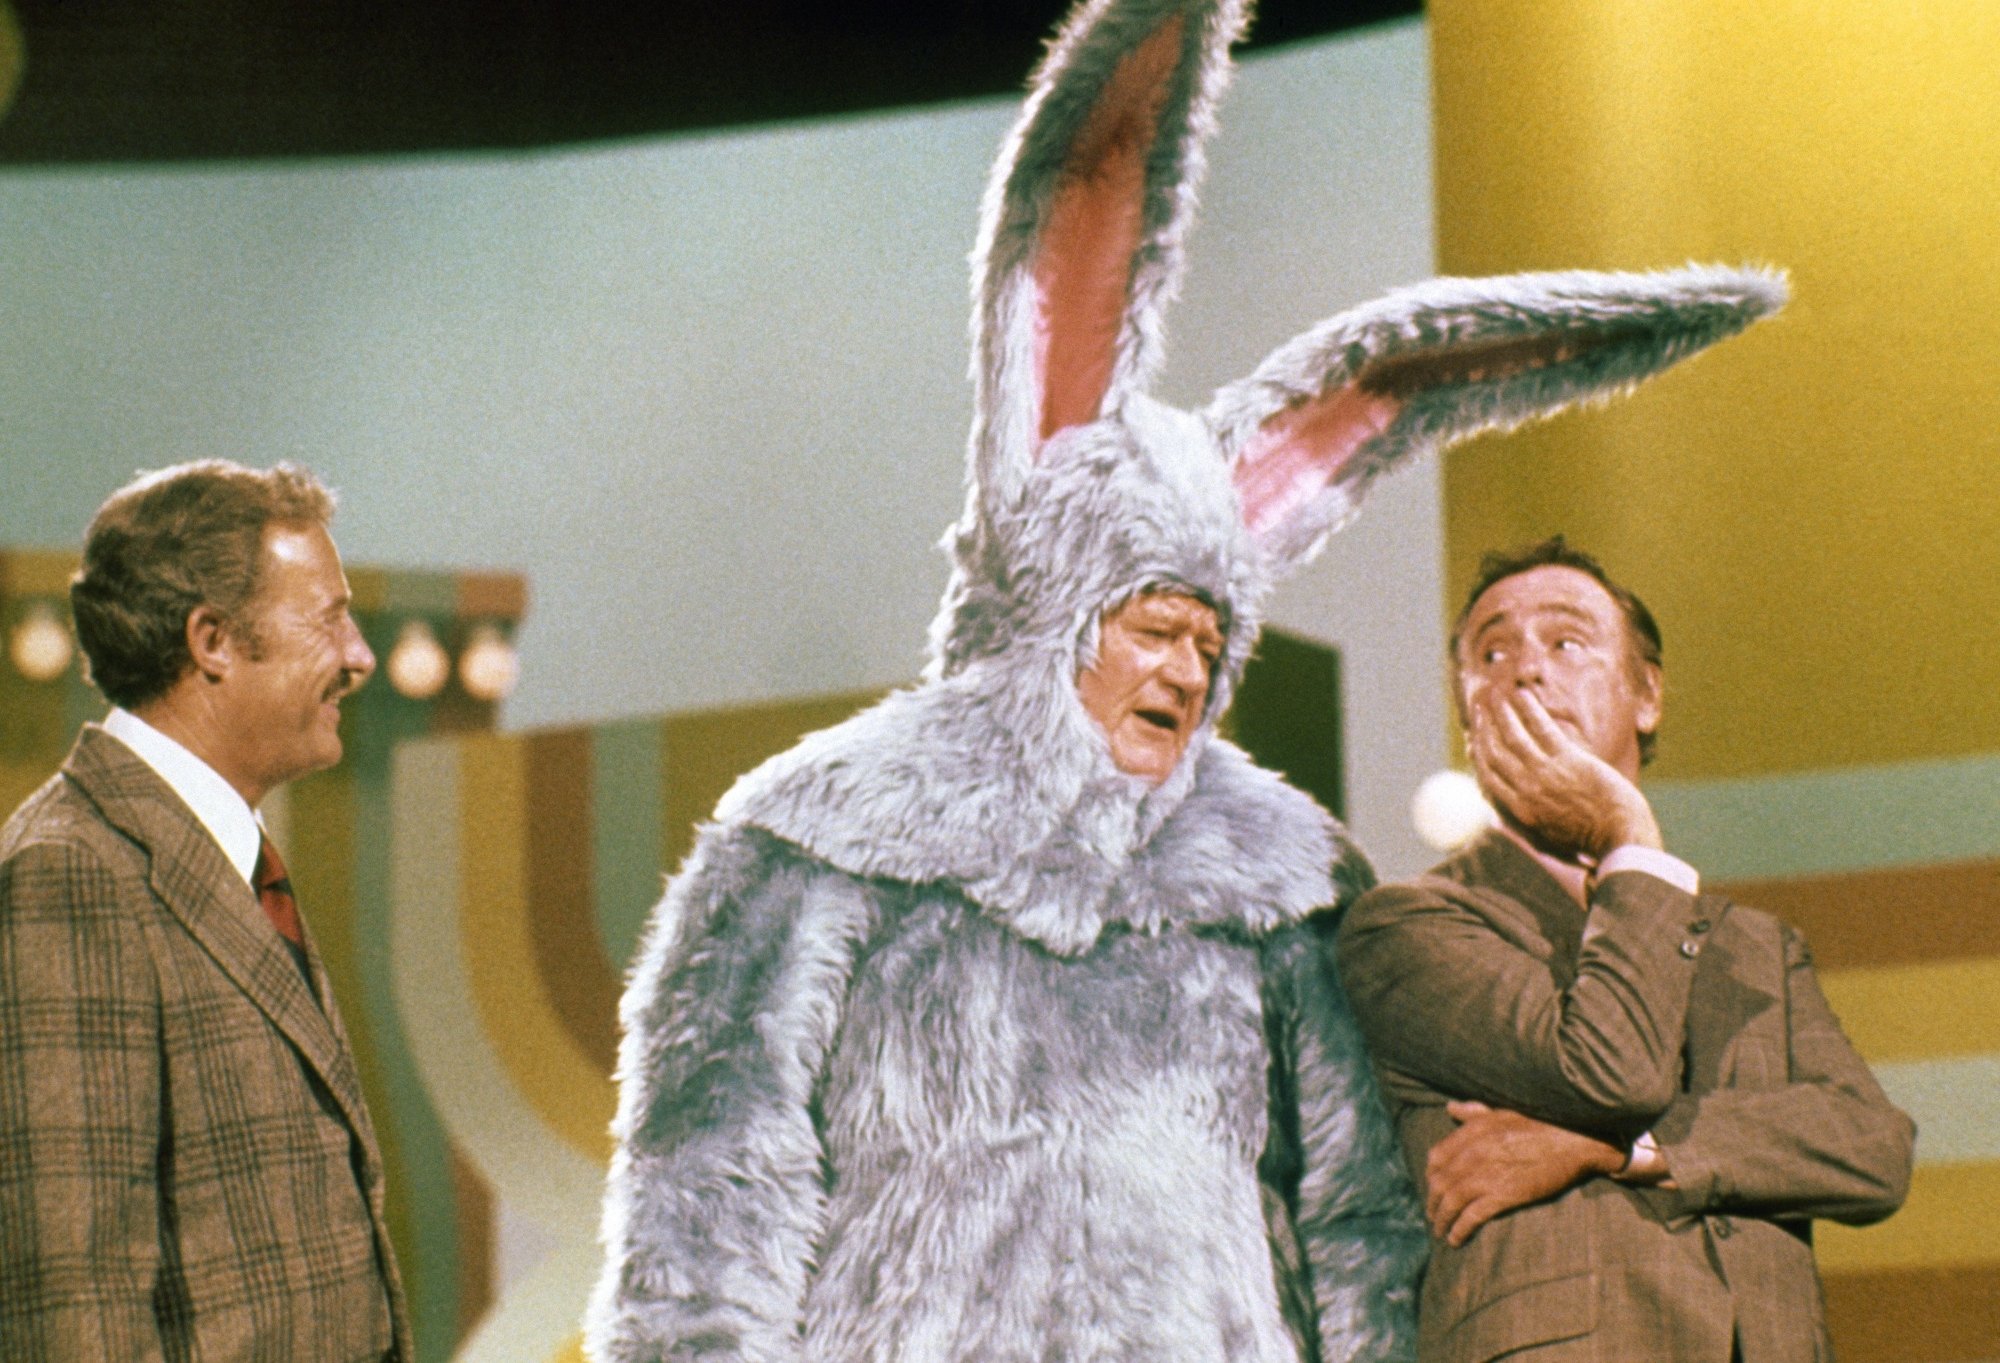 'Rowan and Martin's Laugh-In' Dan Rowan, John Wayne dressed as a bunny, and Dick Martin. The hosts are looking at Wayne, who is mid-speech in the costume.